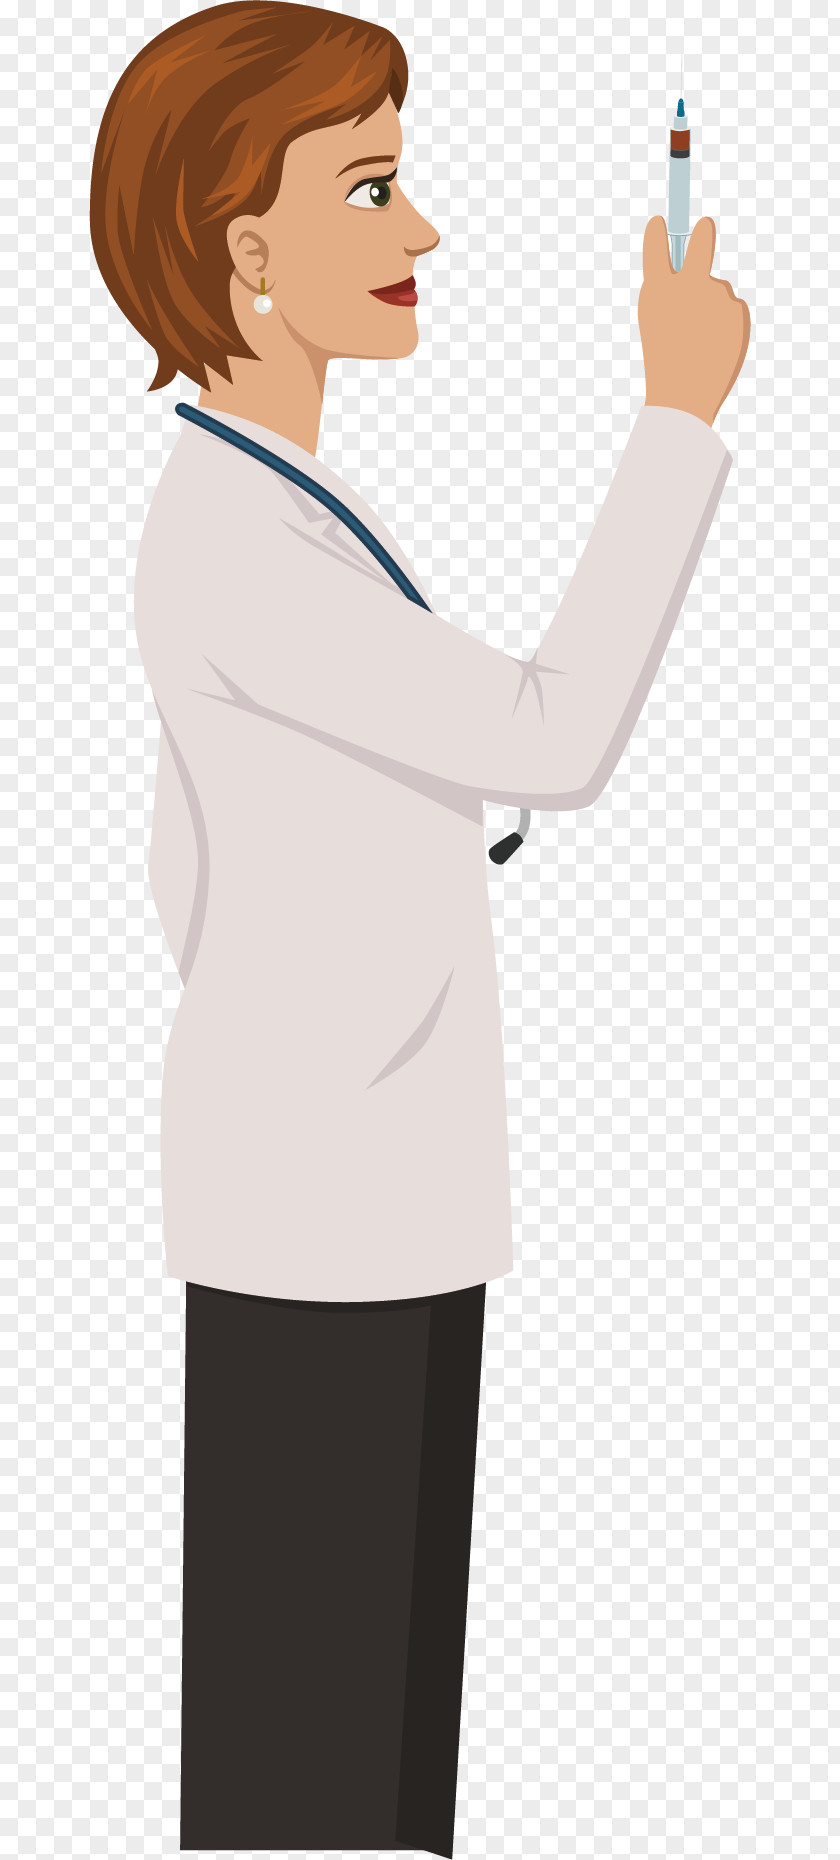 An Injection Woman Doctor Cartoon Physician Illustration PNG